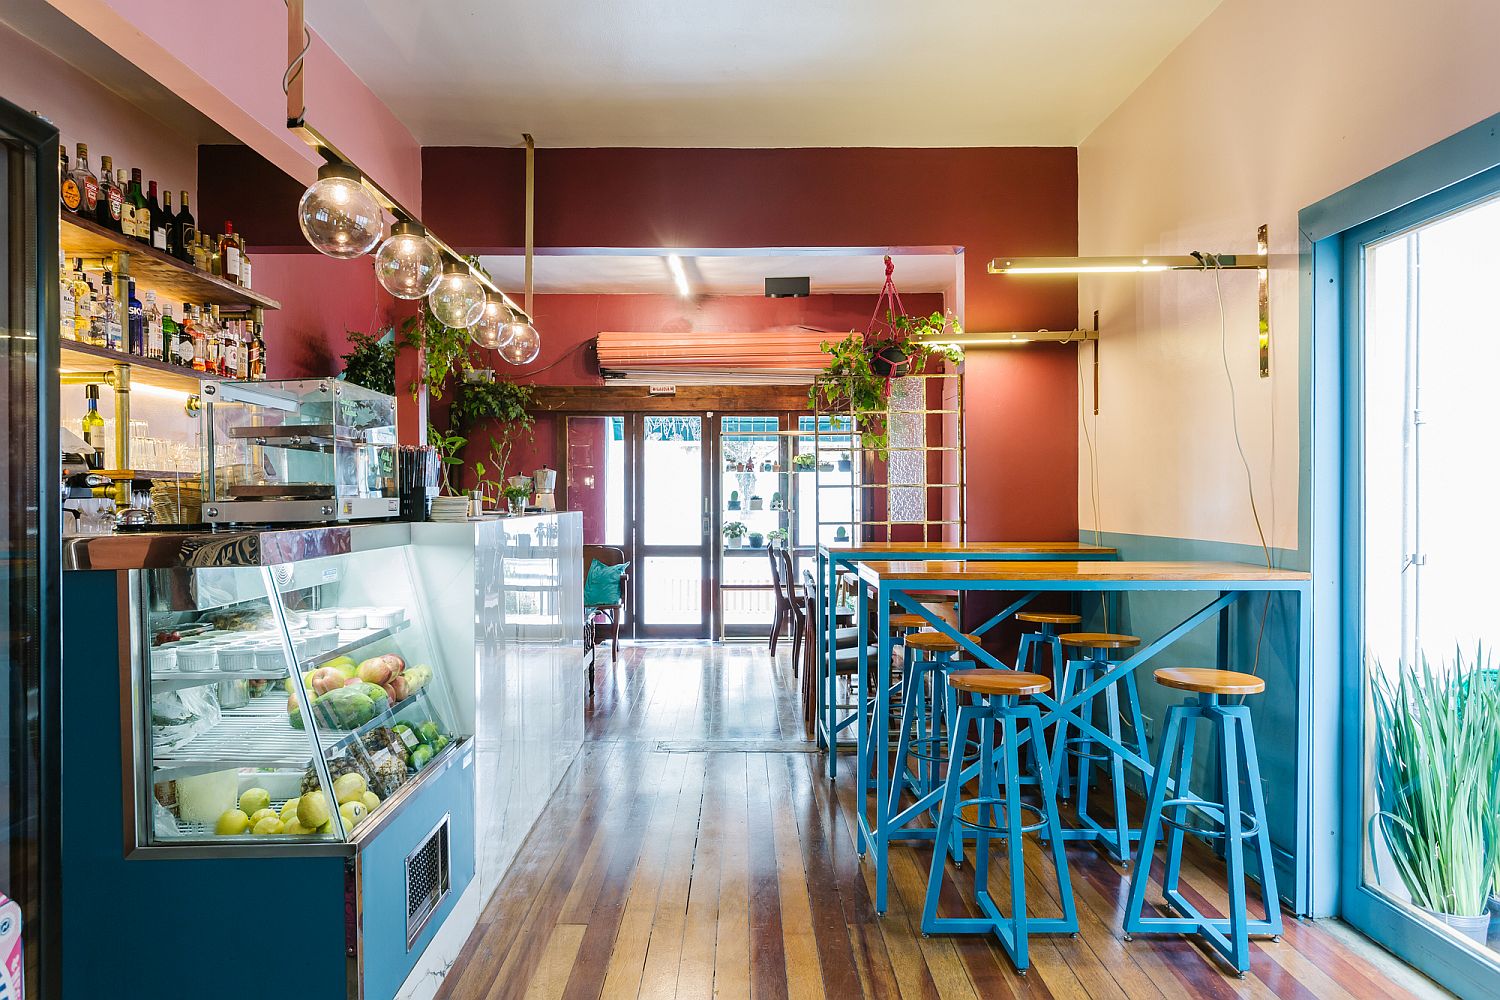 Lighting and bright combination of colors for the cafe